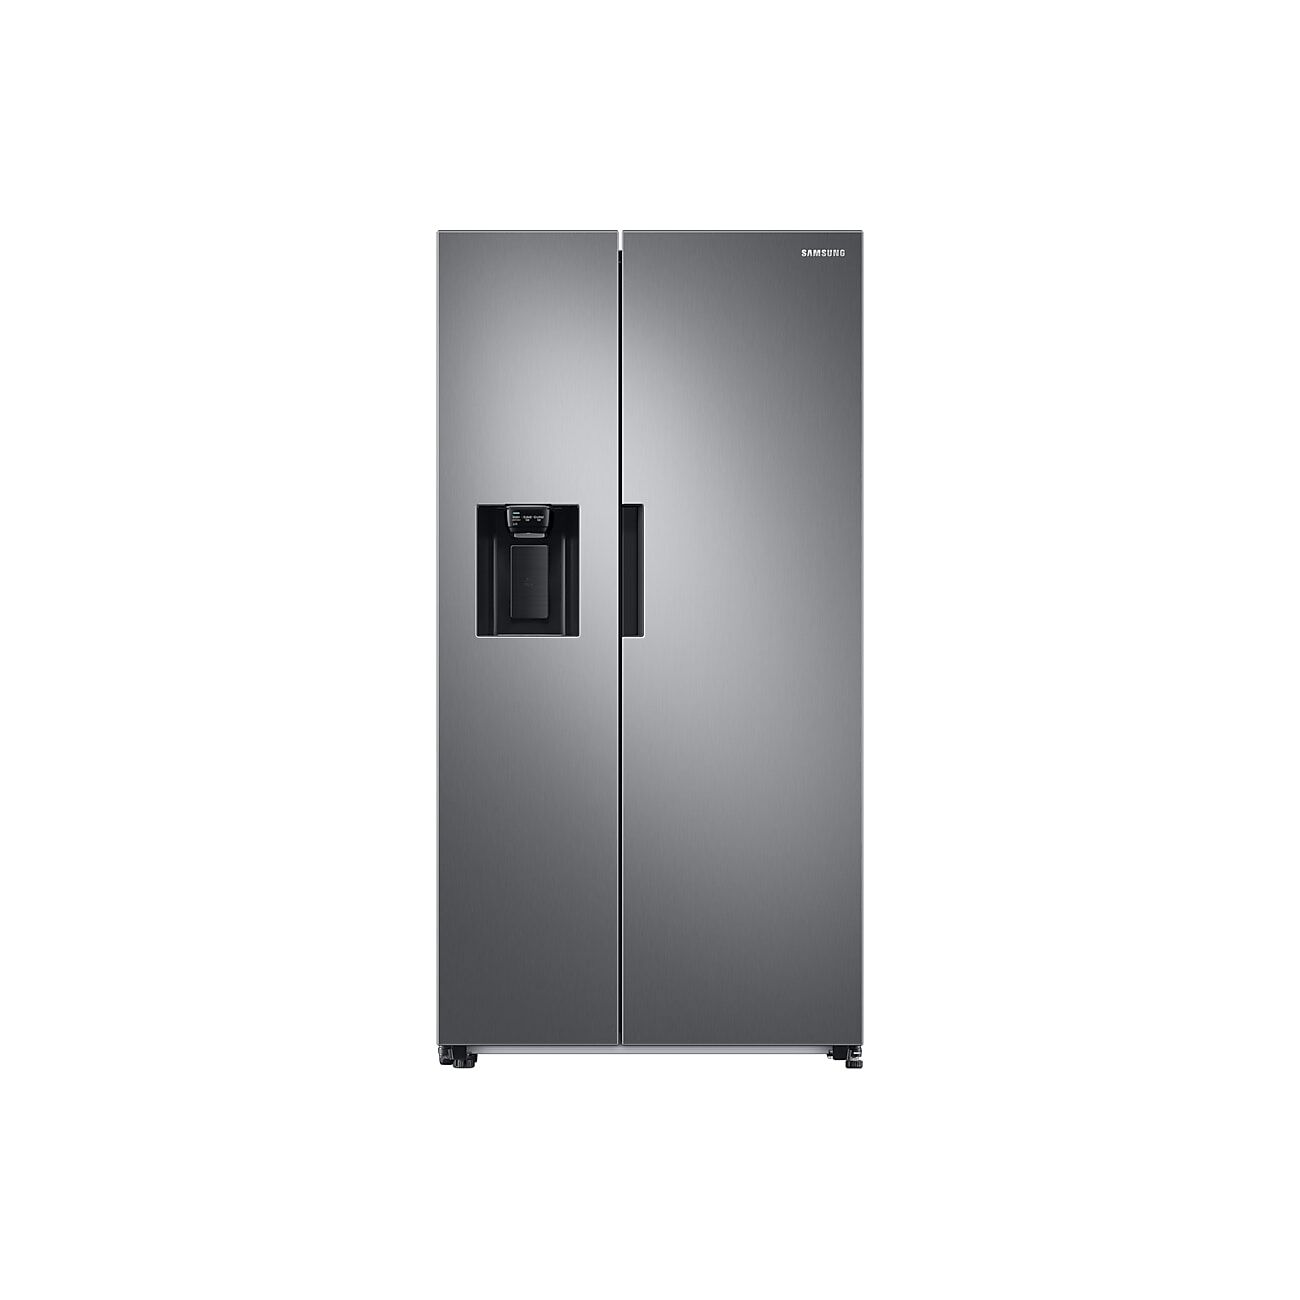 Samsung RS8000 7 Series American Style Fridge Freezer with SpaceMax™ Technology, A++ in Silver (RS67A8811S9/EU)